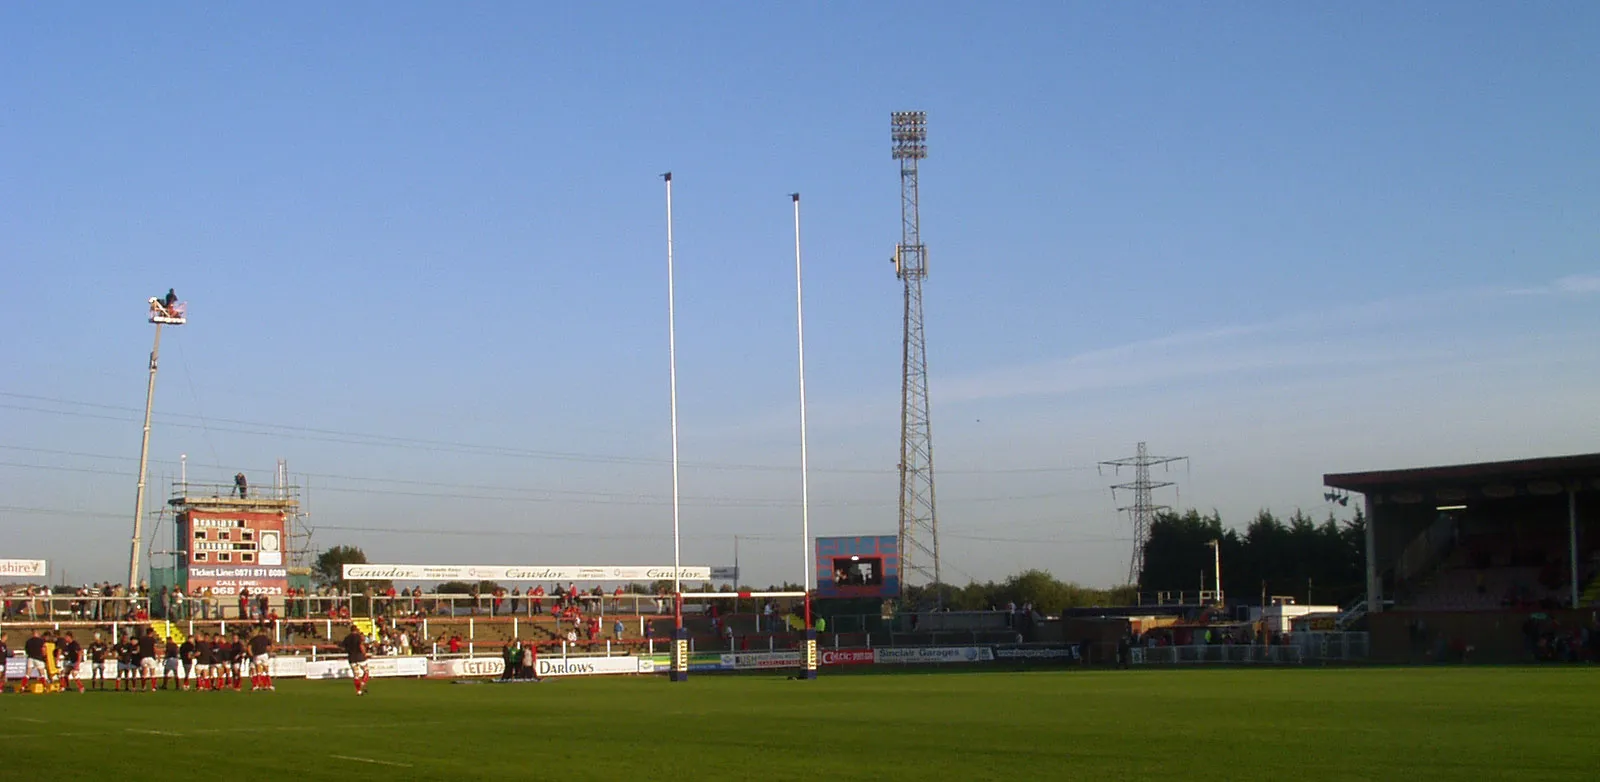 Photo showing: Stradey Park, Llanelli prior to the Magners League rugby match between Llanelli Scarlets and Glasgow Warriors. The image shows the East Terrace. On the top of the cherry picker towards the left of the photo is a BBC cameraman. To the right is the scoreboard. On the pitch below these, the Scarlets team are warming up. Note the 'sosbans' (saucepans) on top of the goalposts. The blue box to the right of the goalposts is the television studio. The outside broadcast trucks can be seen below the electricity pylon.